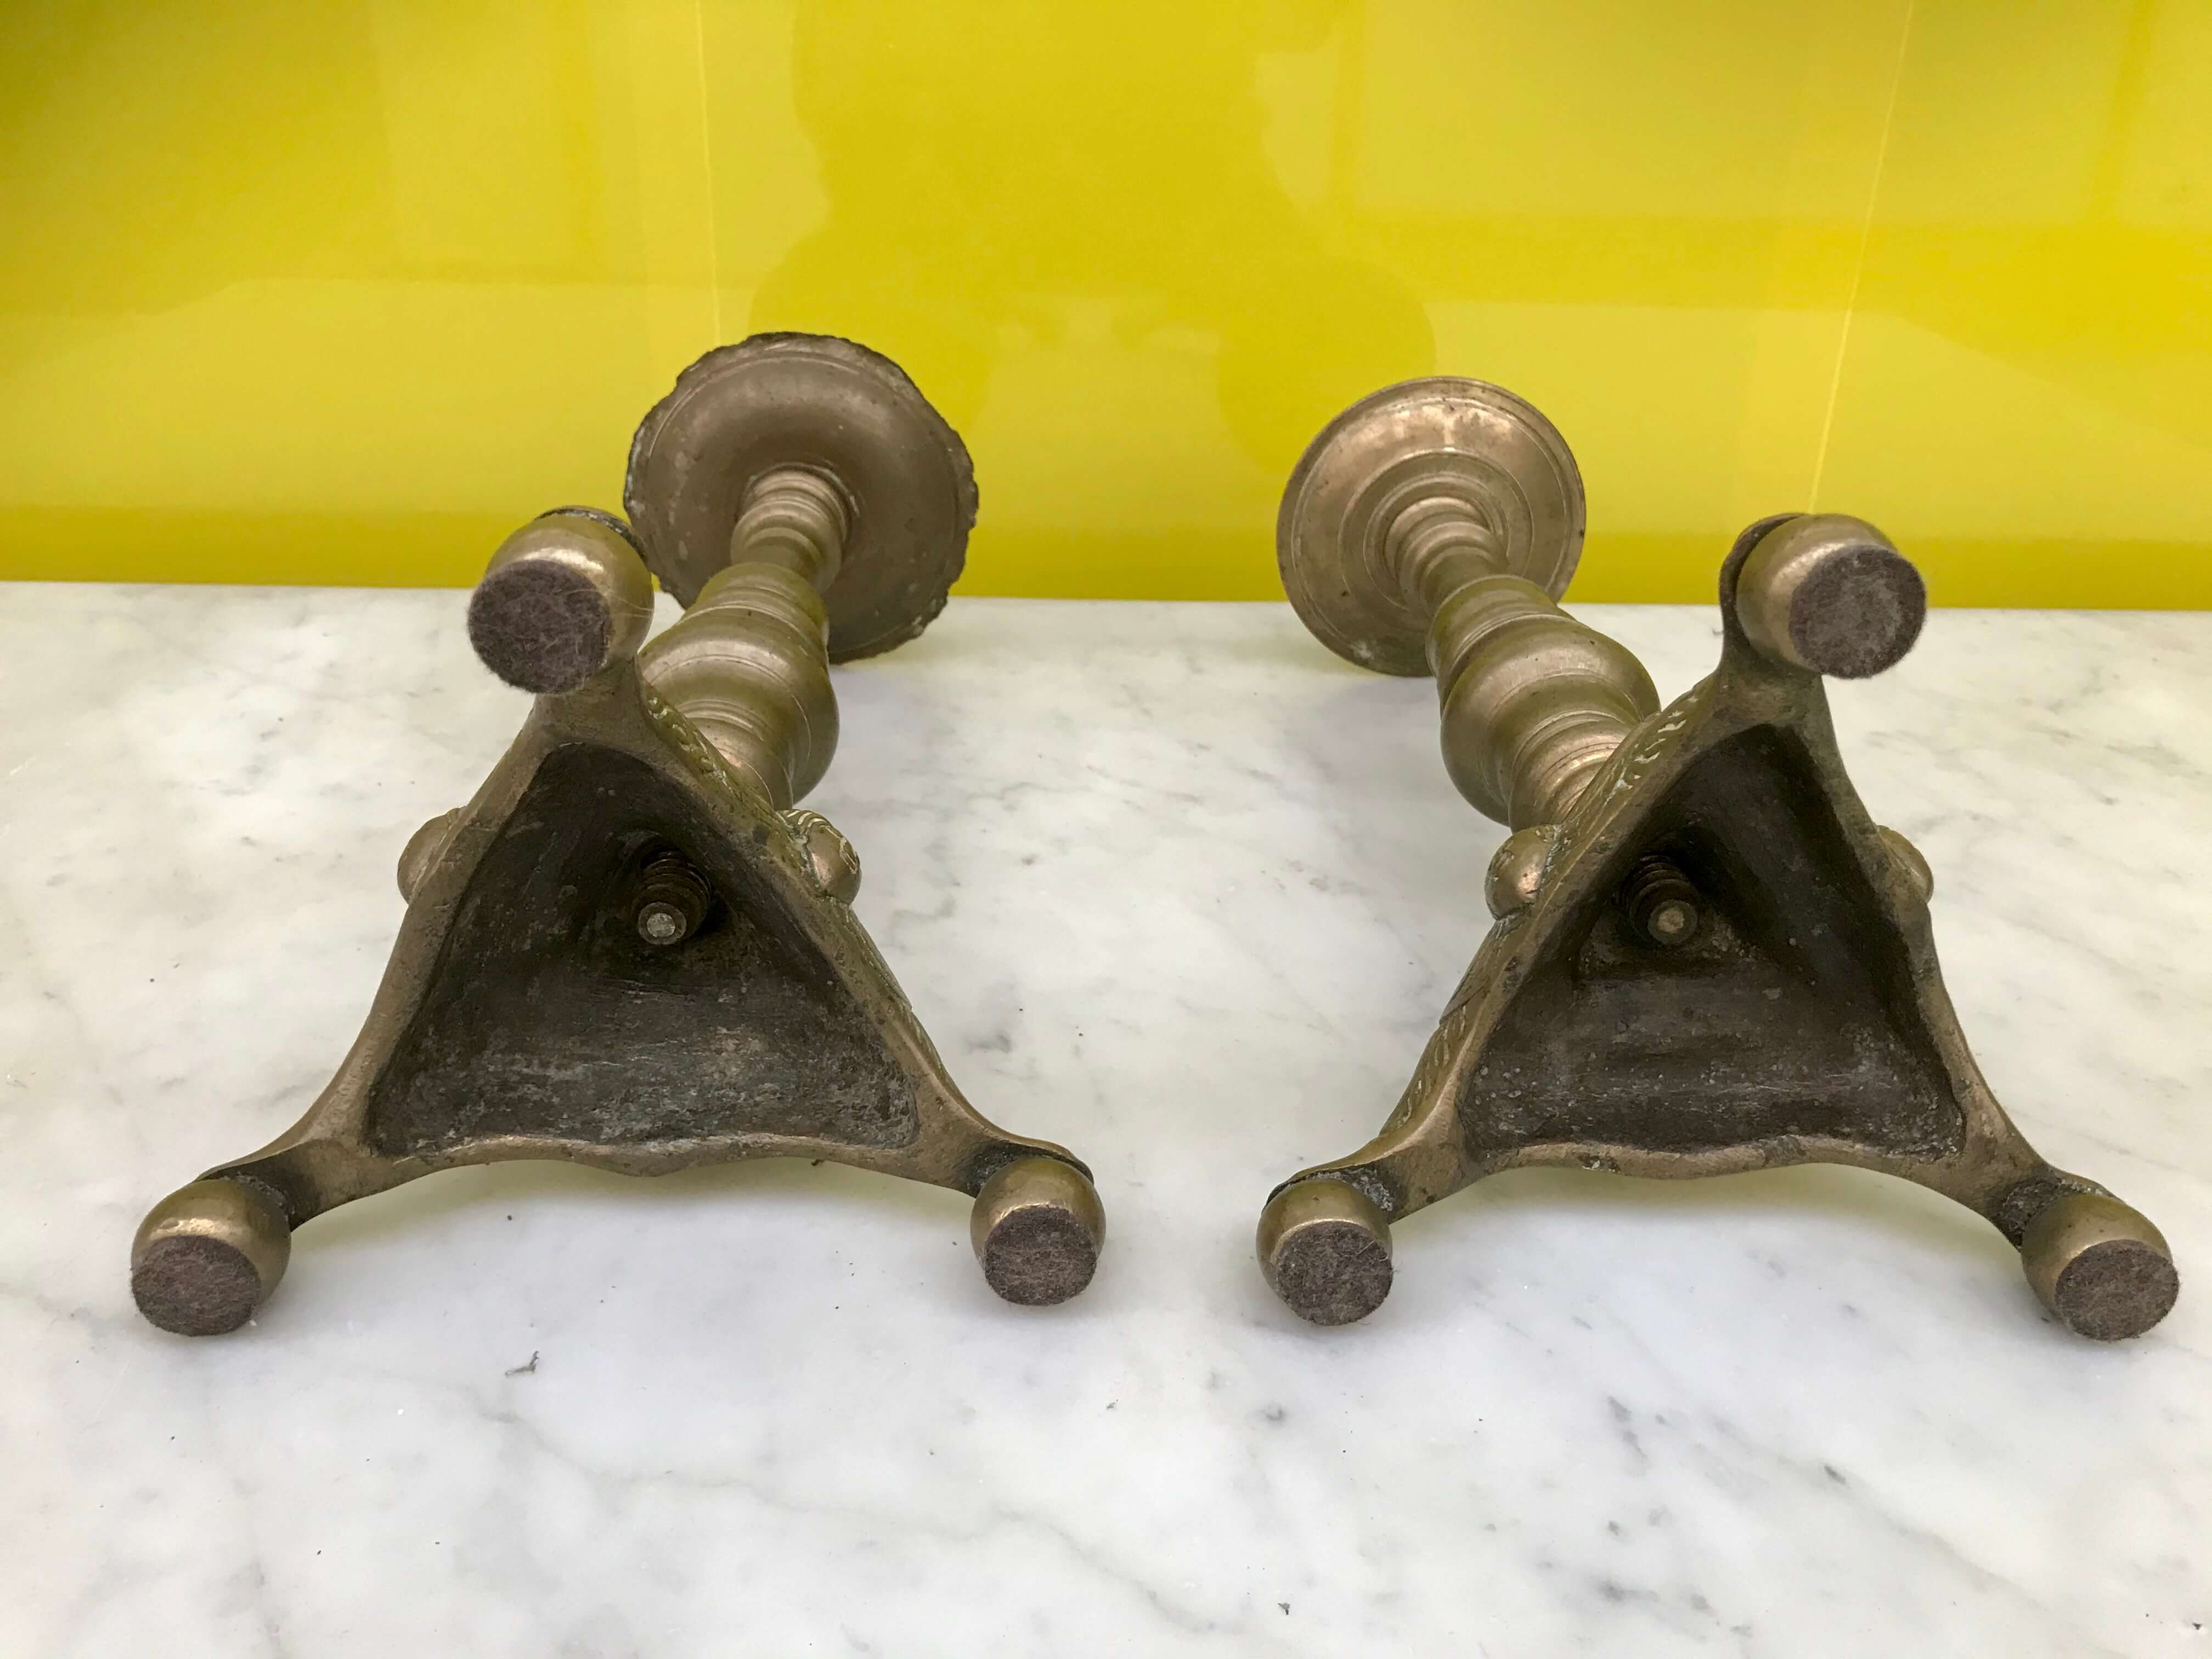 Pair of brass and oxidized brass candle holders, 1940s